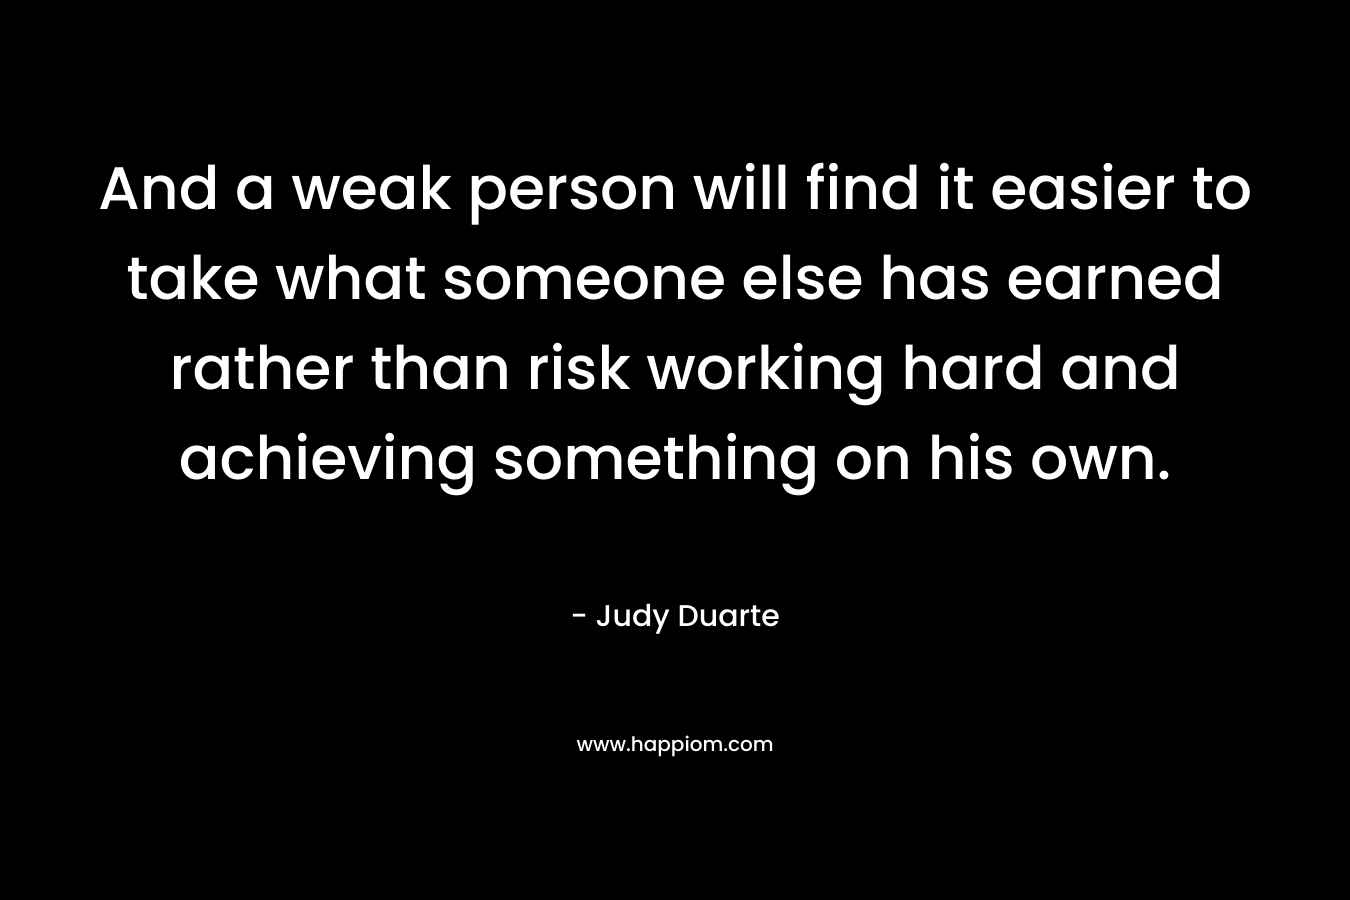 And a weak person will find it easier to take what someone else has earned rather than risk working hard and achieving something on his own. – Judy Duarte